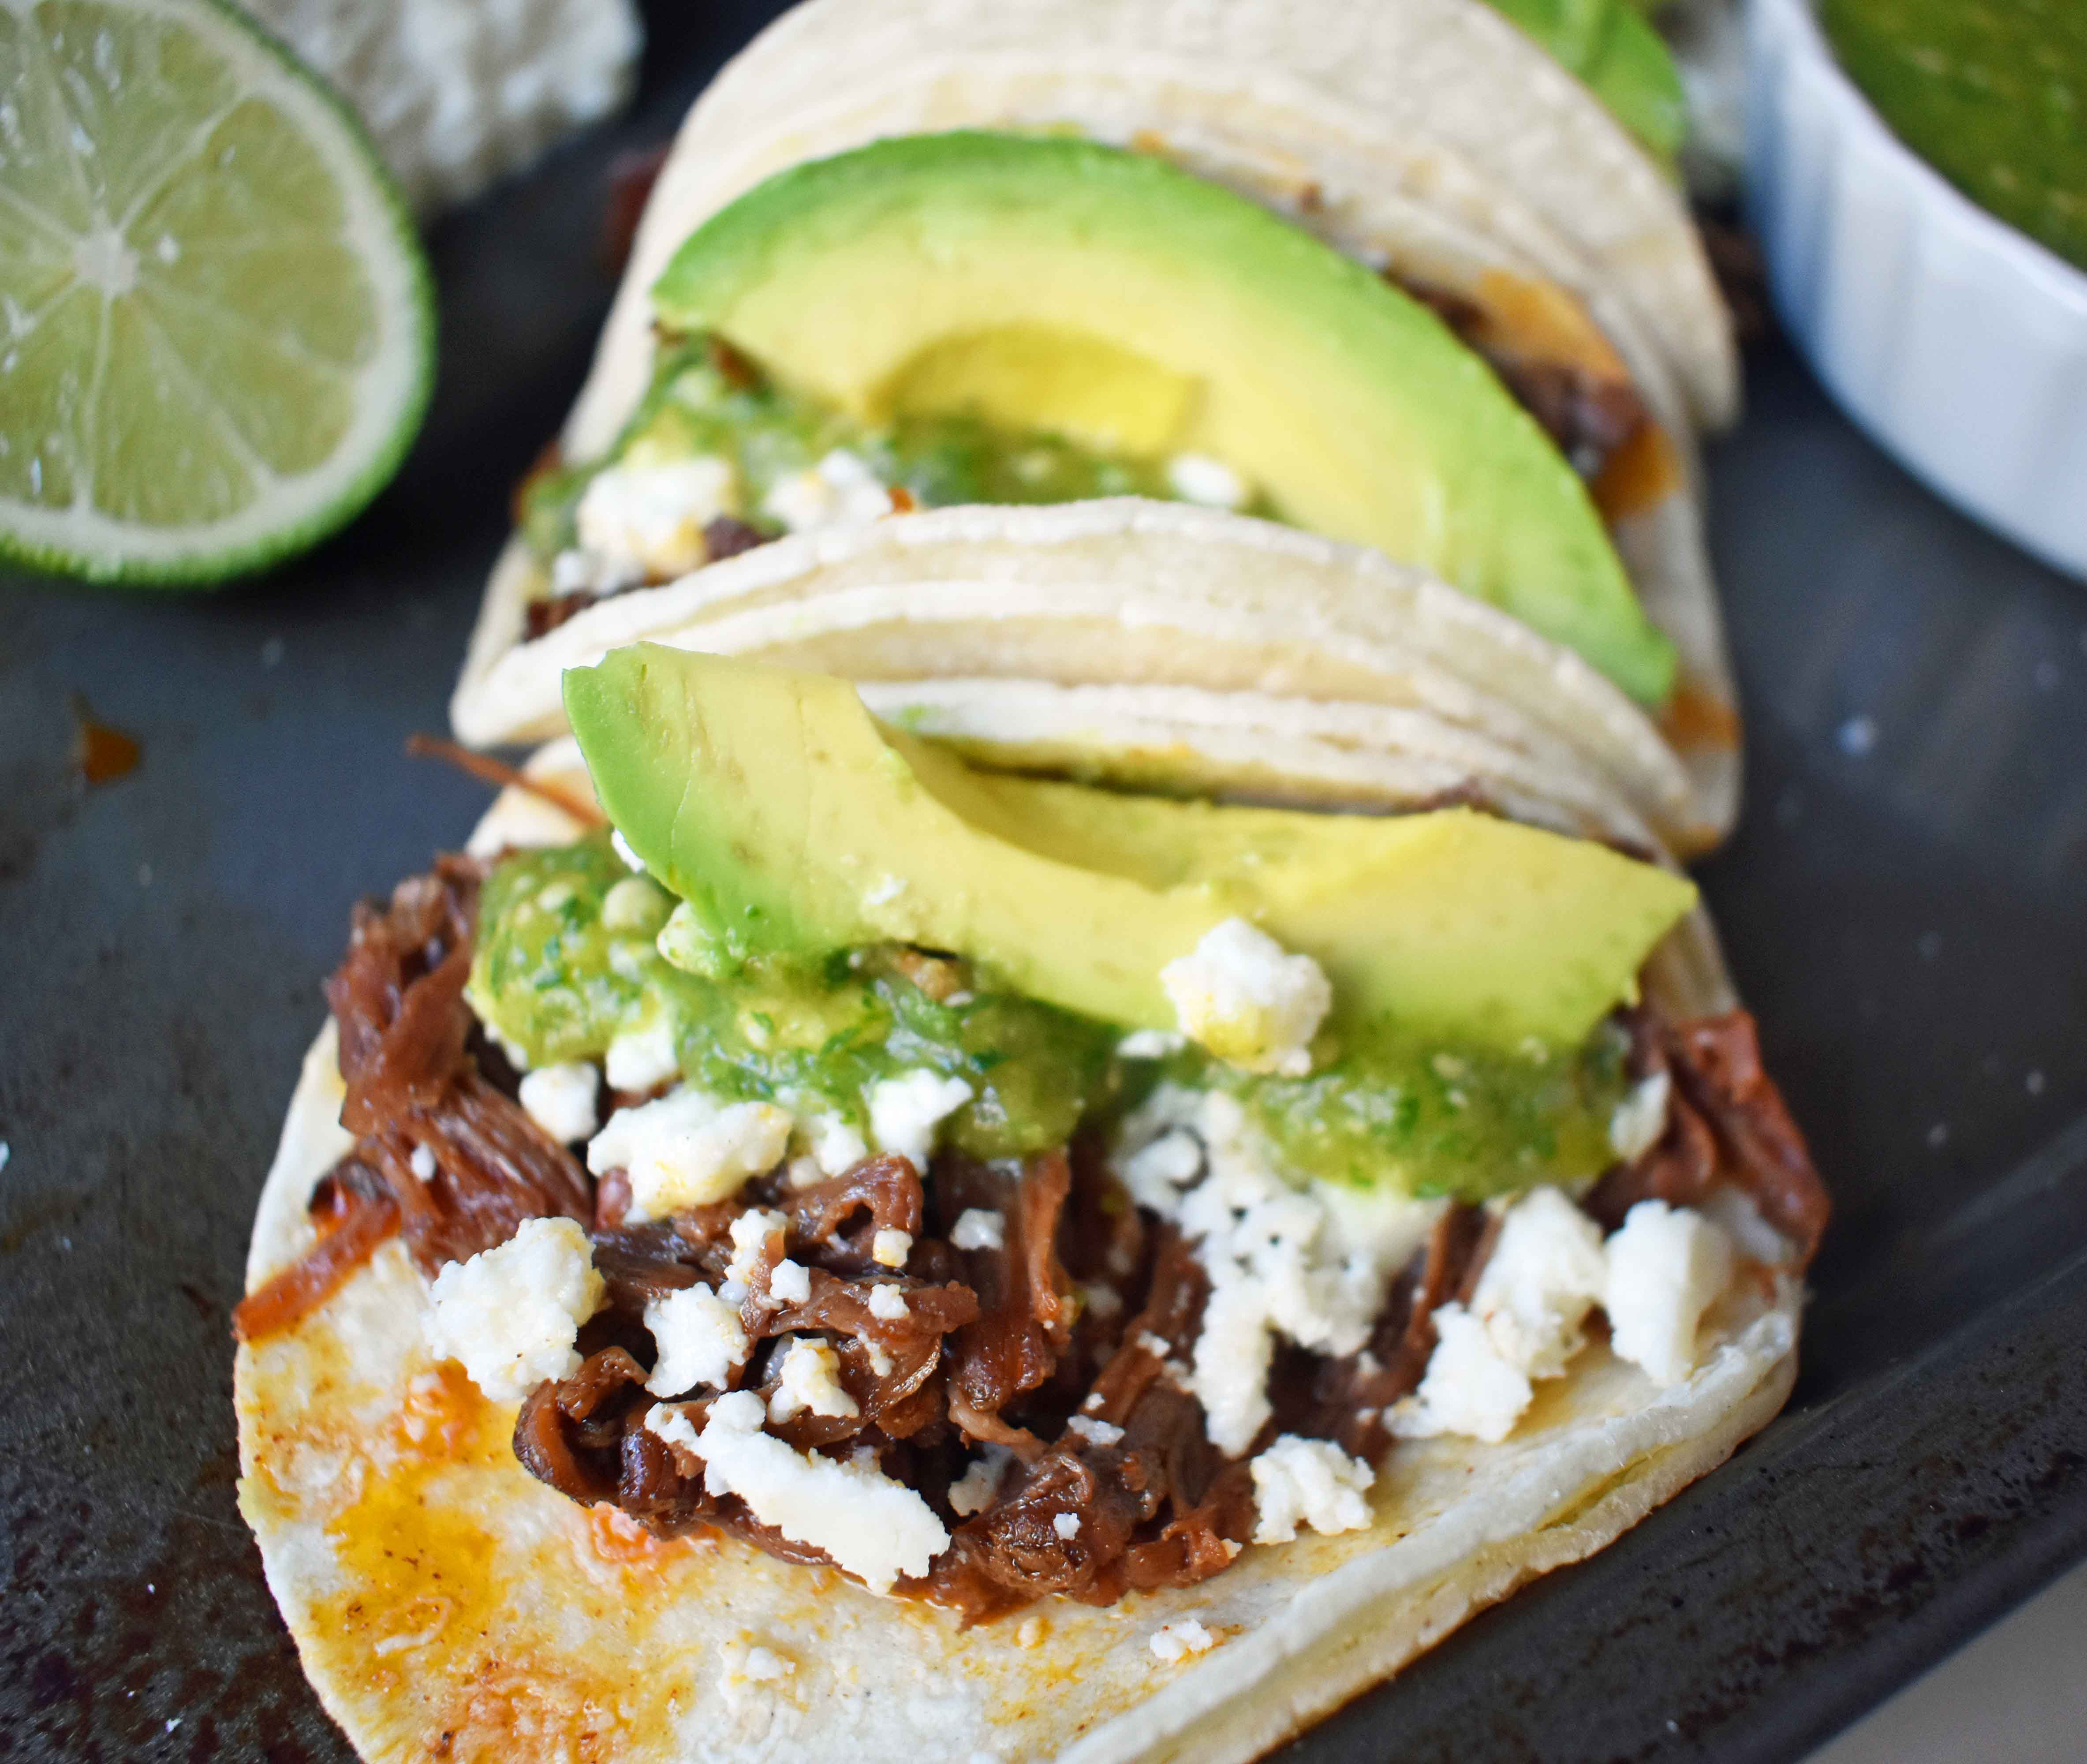 Slow Cooker Beef Barbacoa Tacos with Homemade Tomatillo Salsa. Tender spicy beef barbacoa made in slow cooker and topped with fresh avocado, queso fresco cheese, and homemade tomatillo salsa. www.modernhoney.com